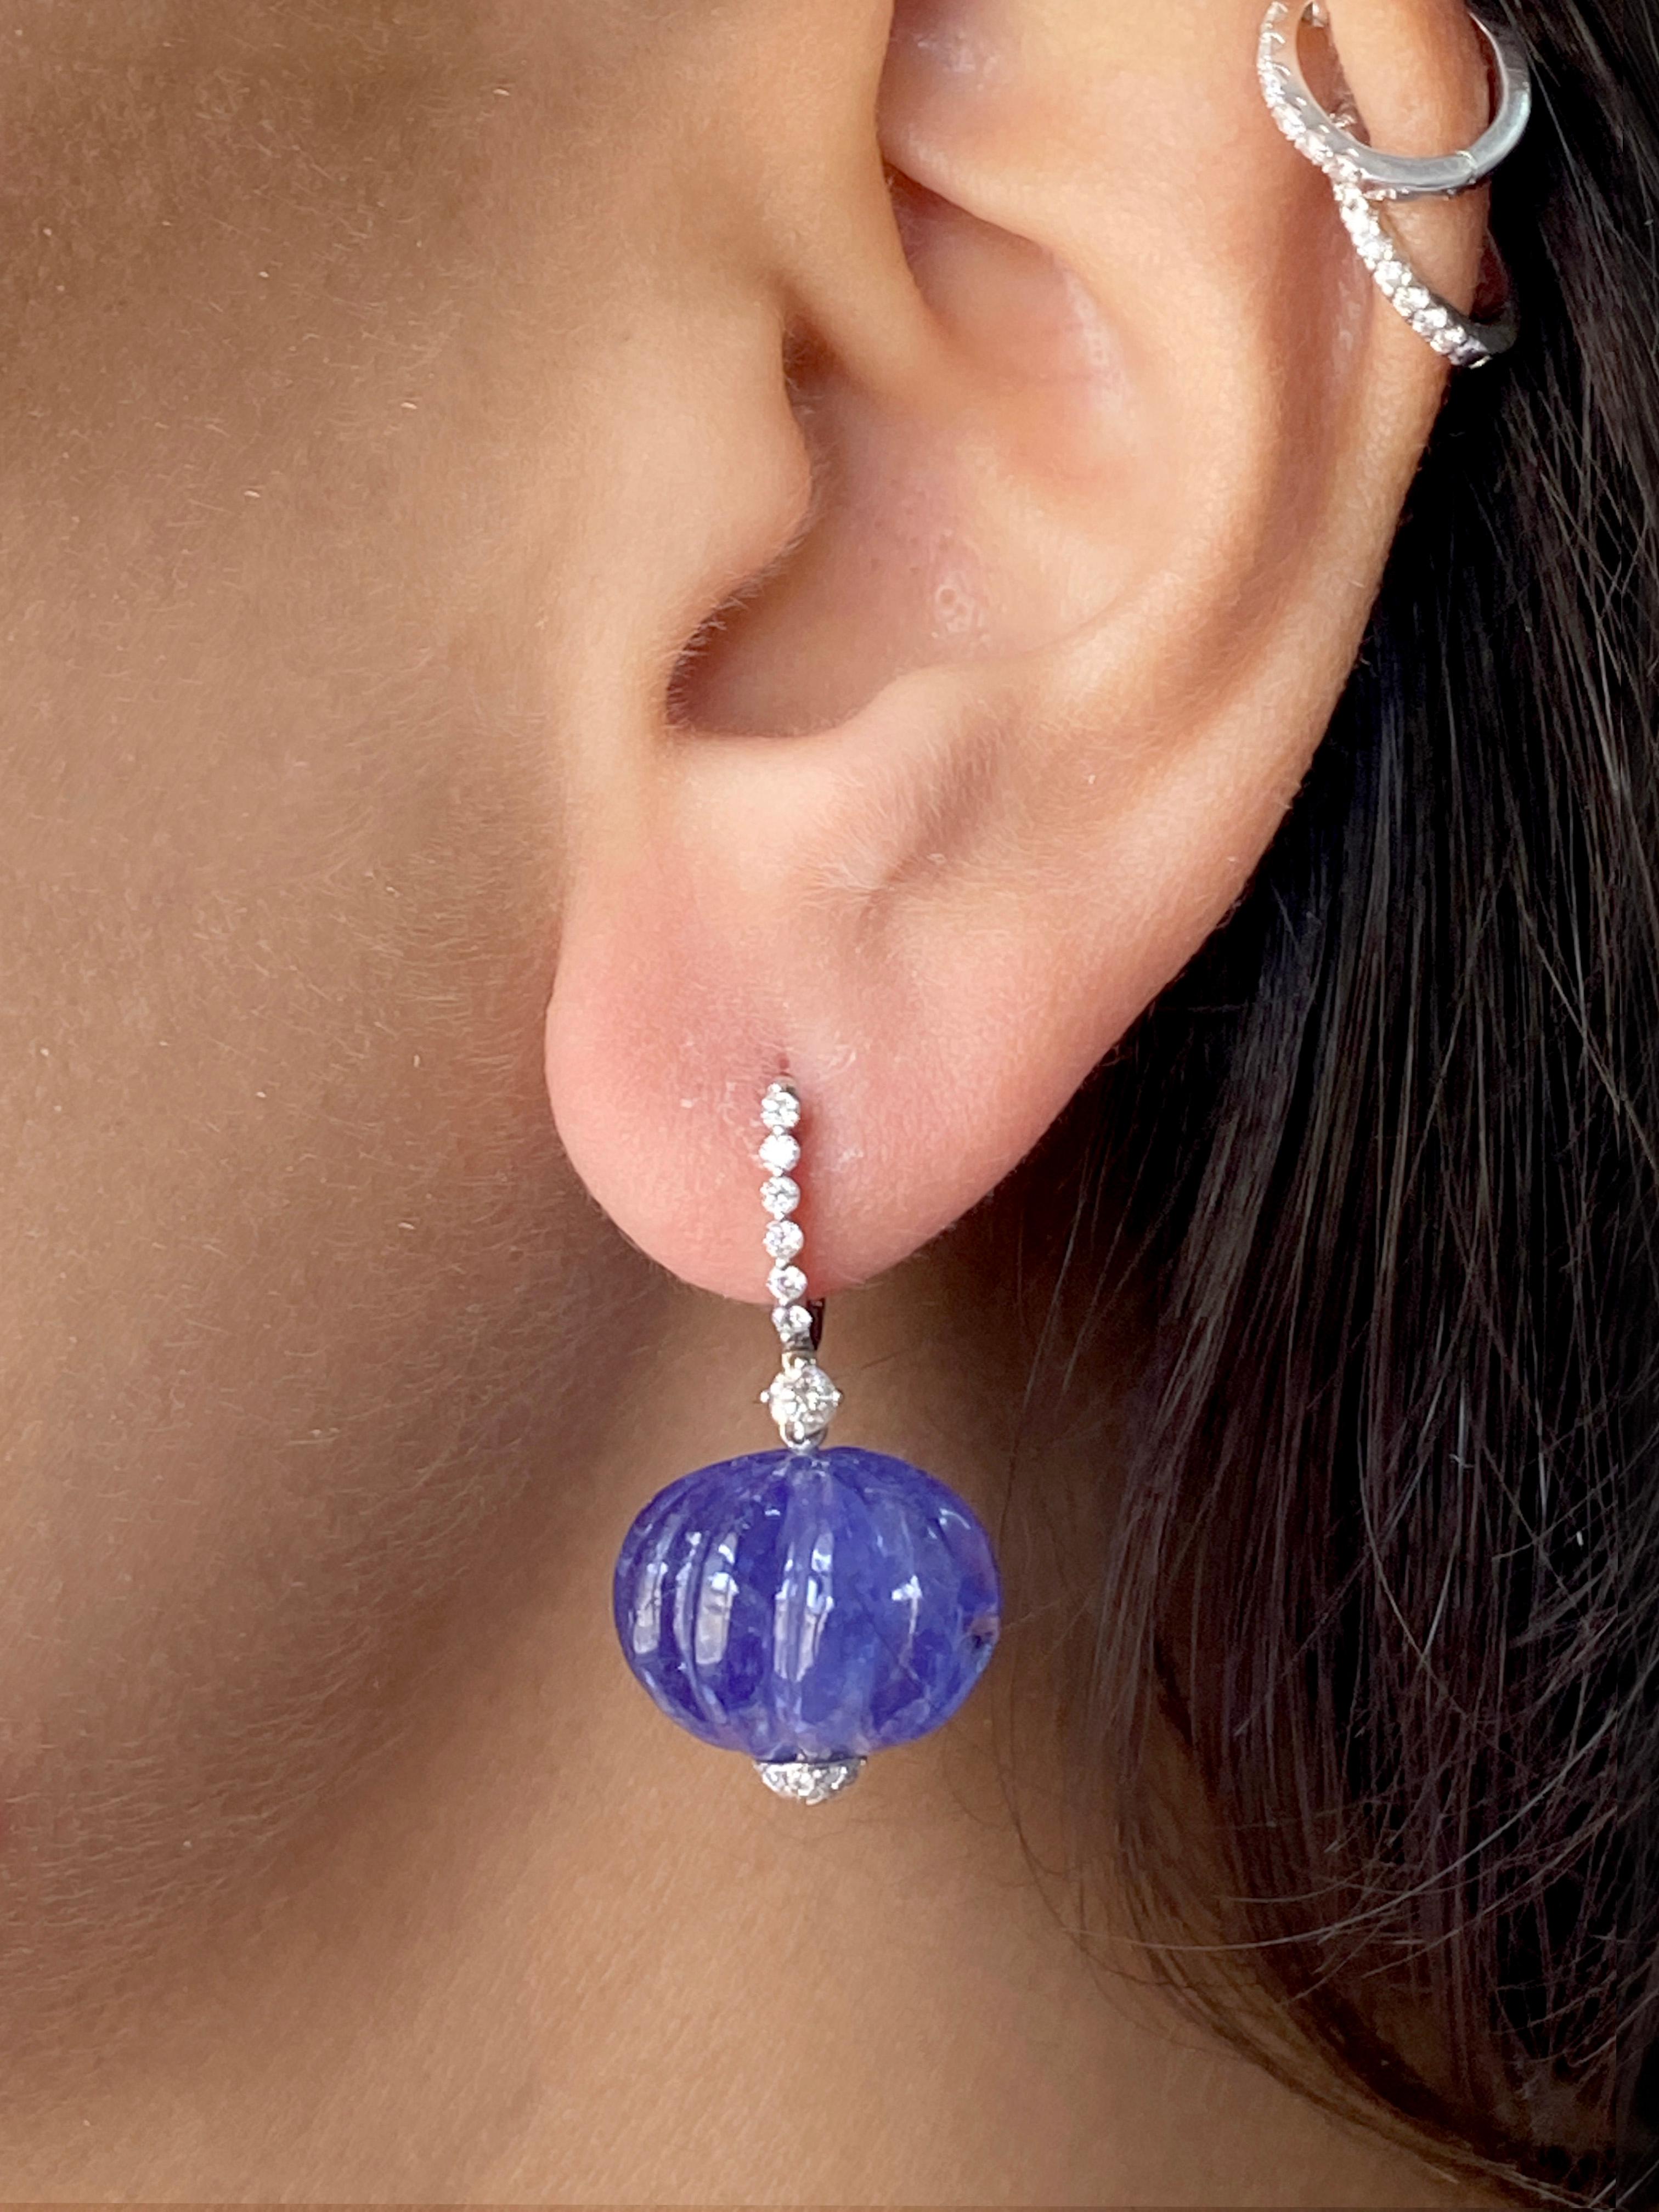 Feel unique and ethereal in with these Tanzanite Carved Drop Dangle Earrings! These earrings are carefully crafted in 18 karat white gold with two melon shaped, carved genuine tanzanite on the bottom, that are the showcase of these charming